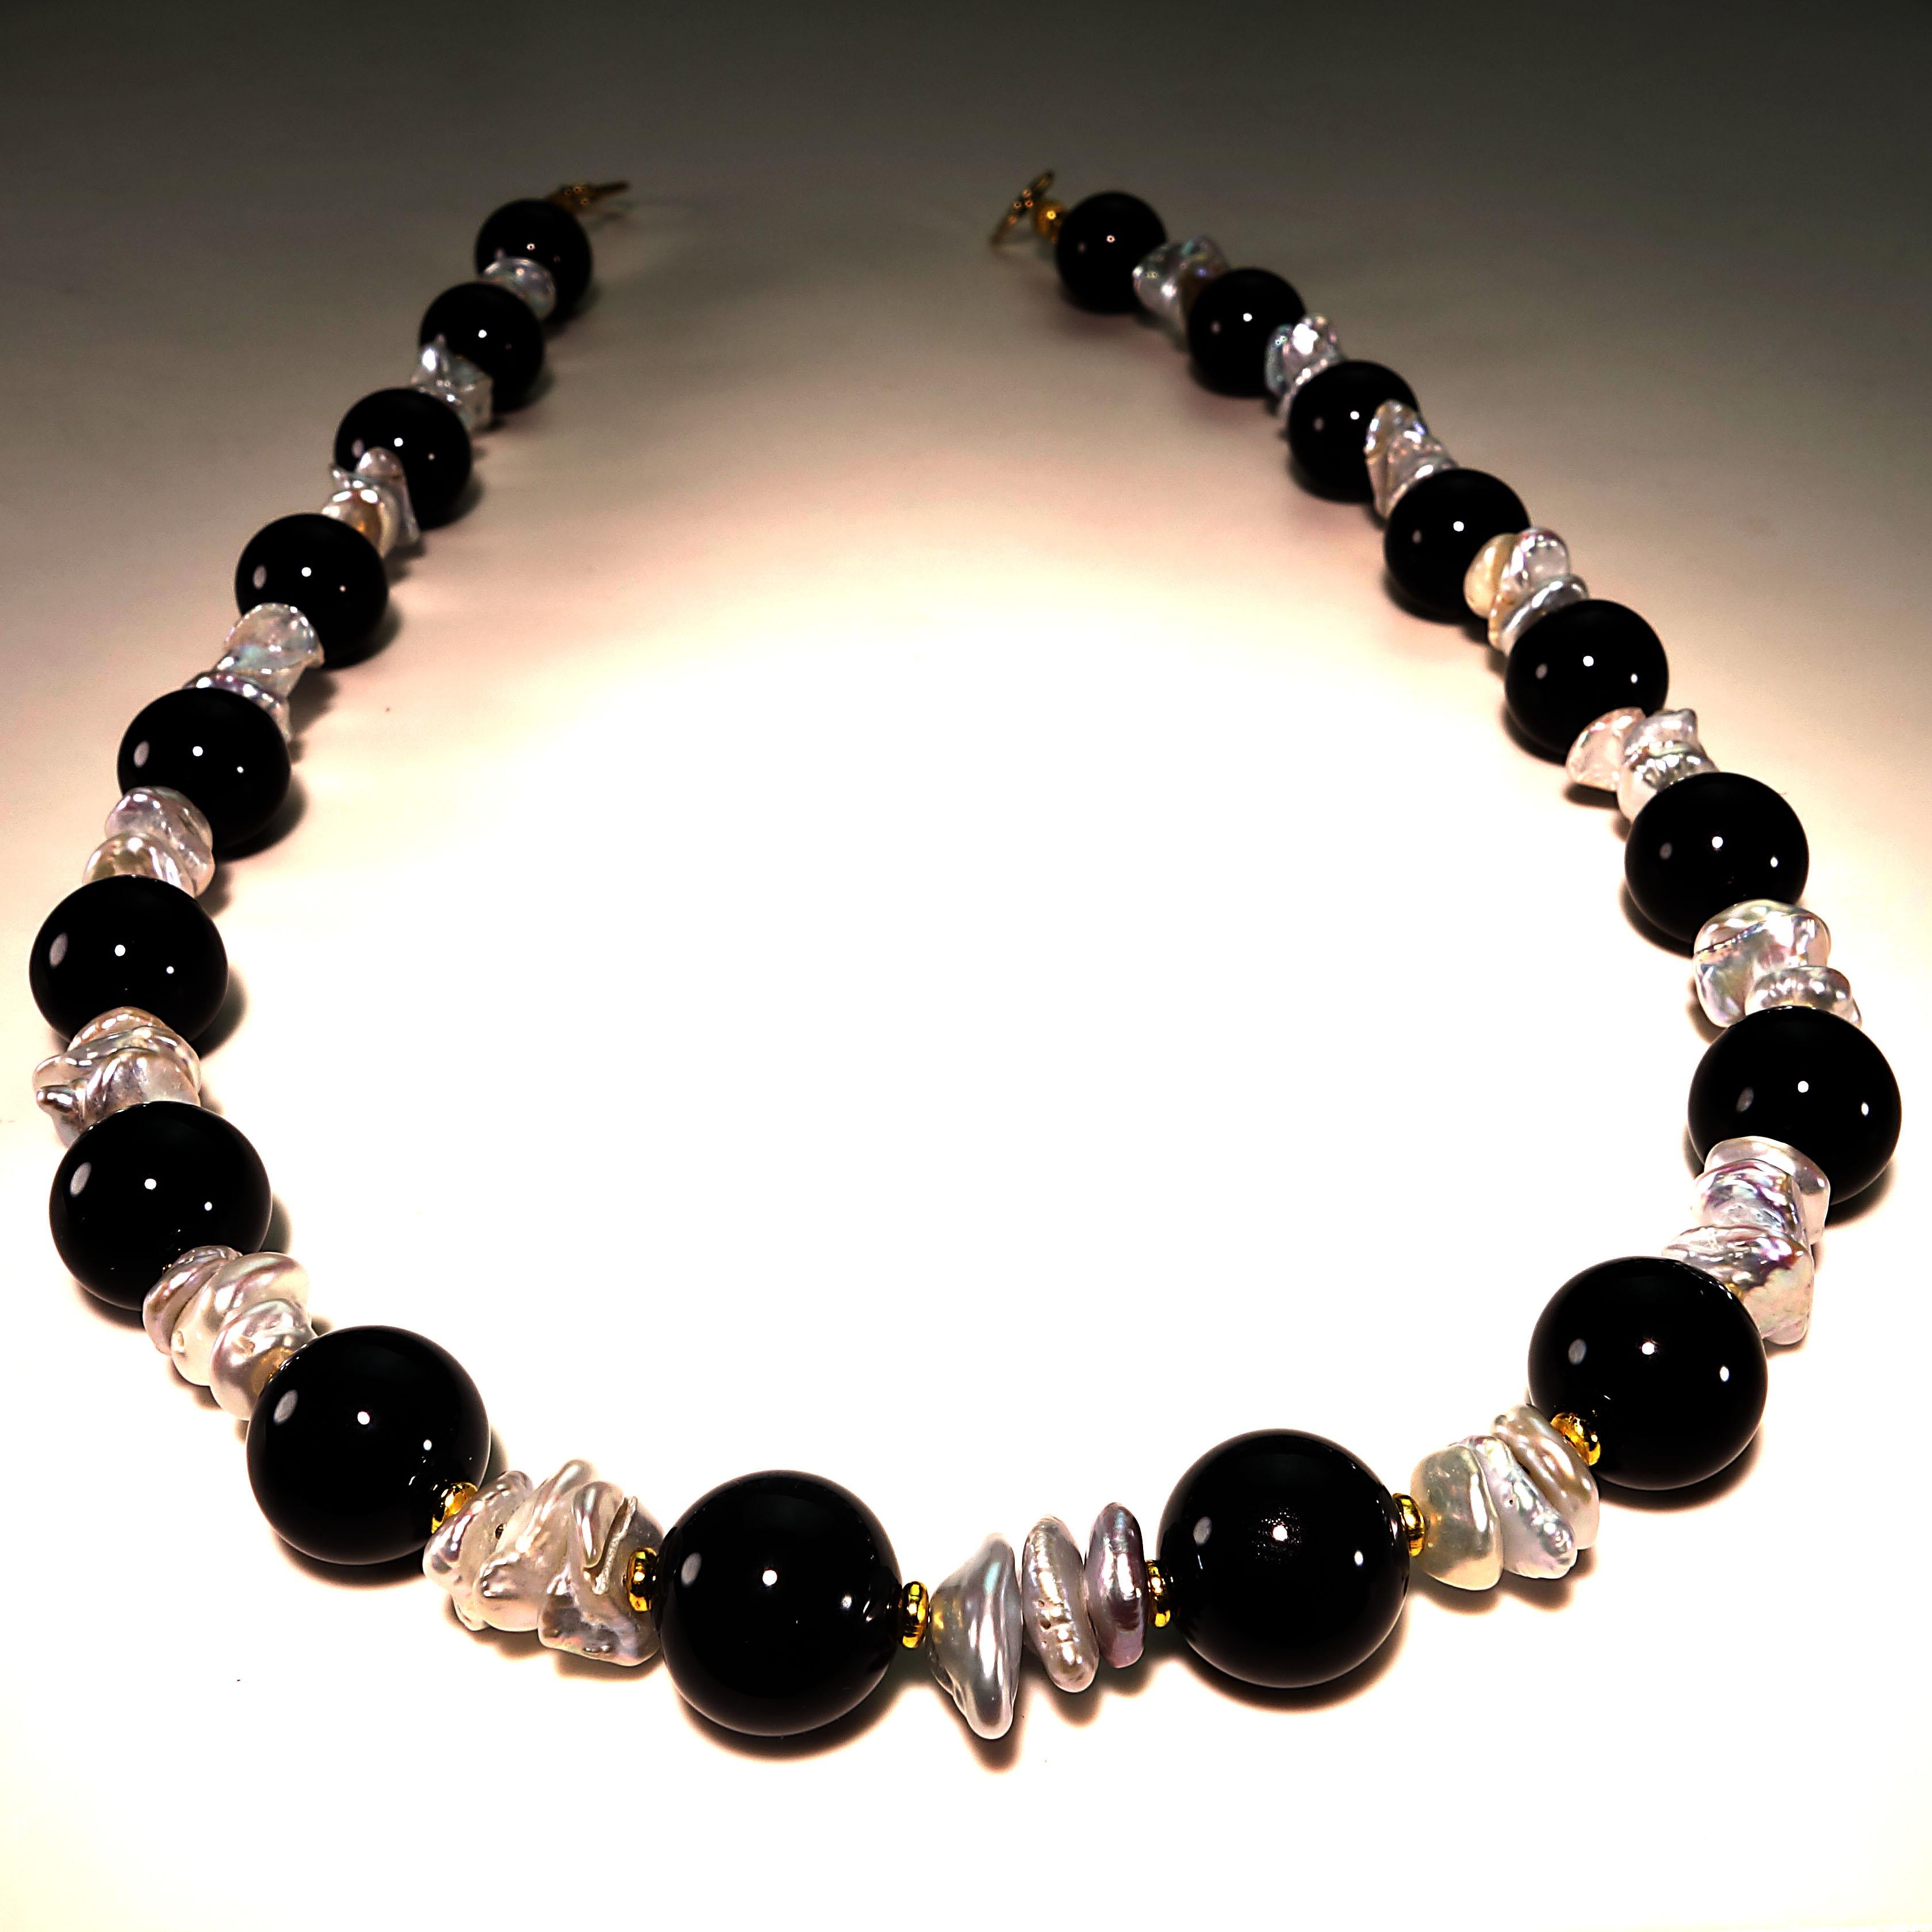 Bead AJD Elegant Black Onyx and White Pearl Necklace June Birthstone  Great Gift!! For Sale